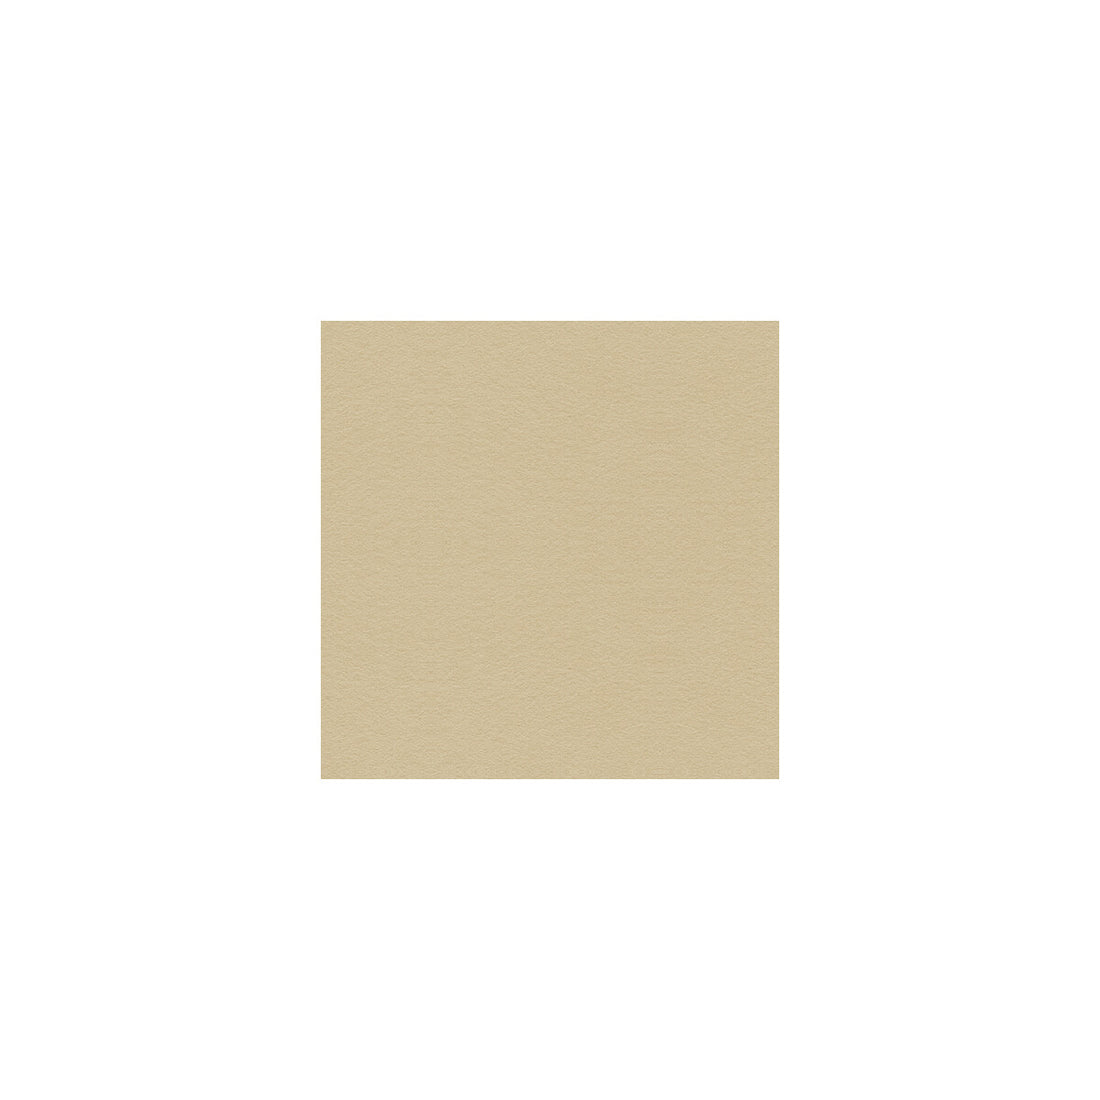 Ultimate fabric in bisque color - pattern 960122.100.0 - by Lee Jofa in the Ultimate Suede collection